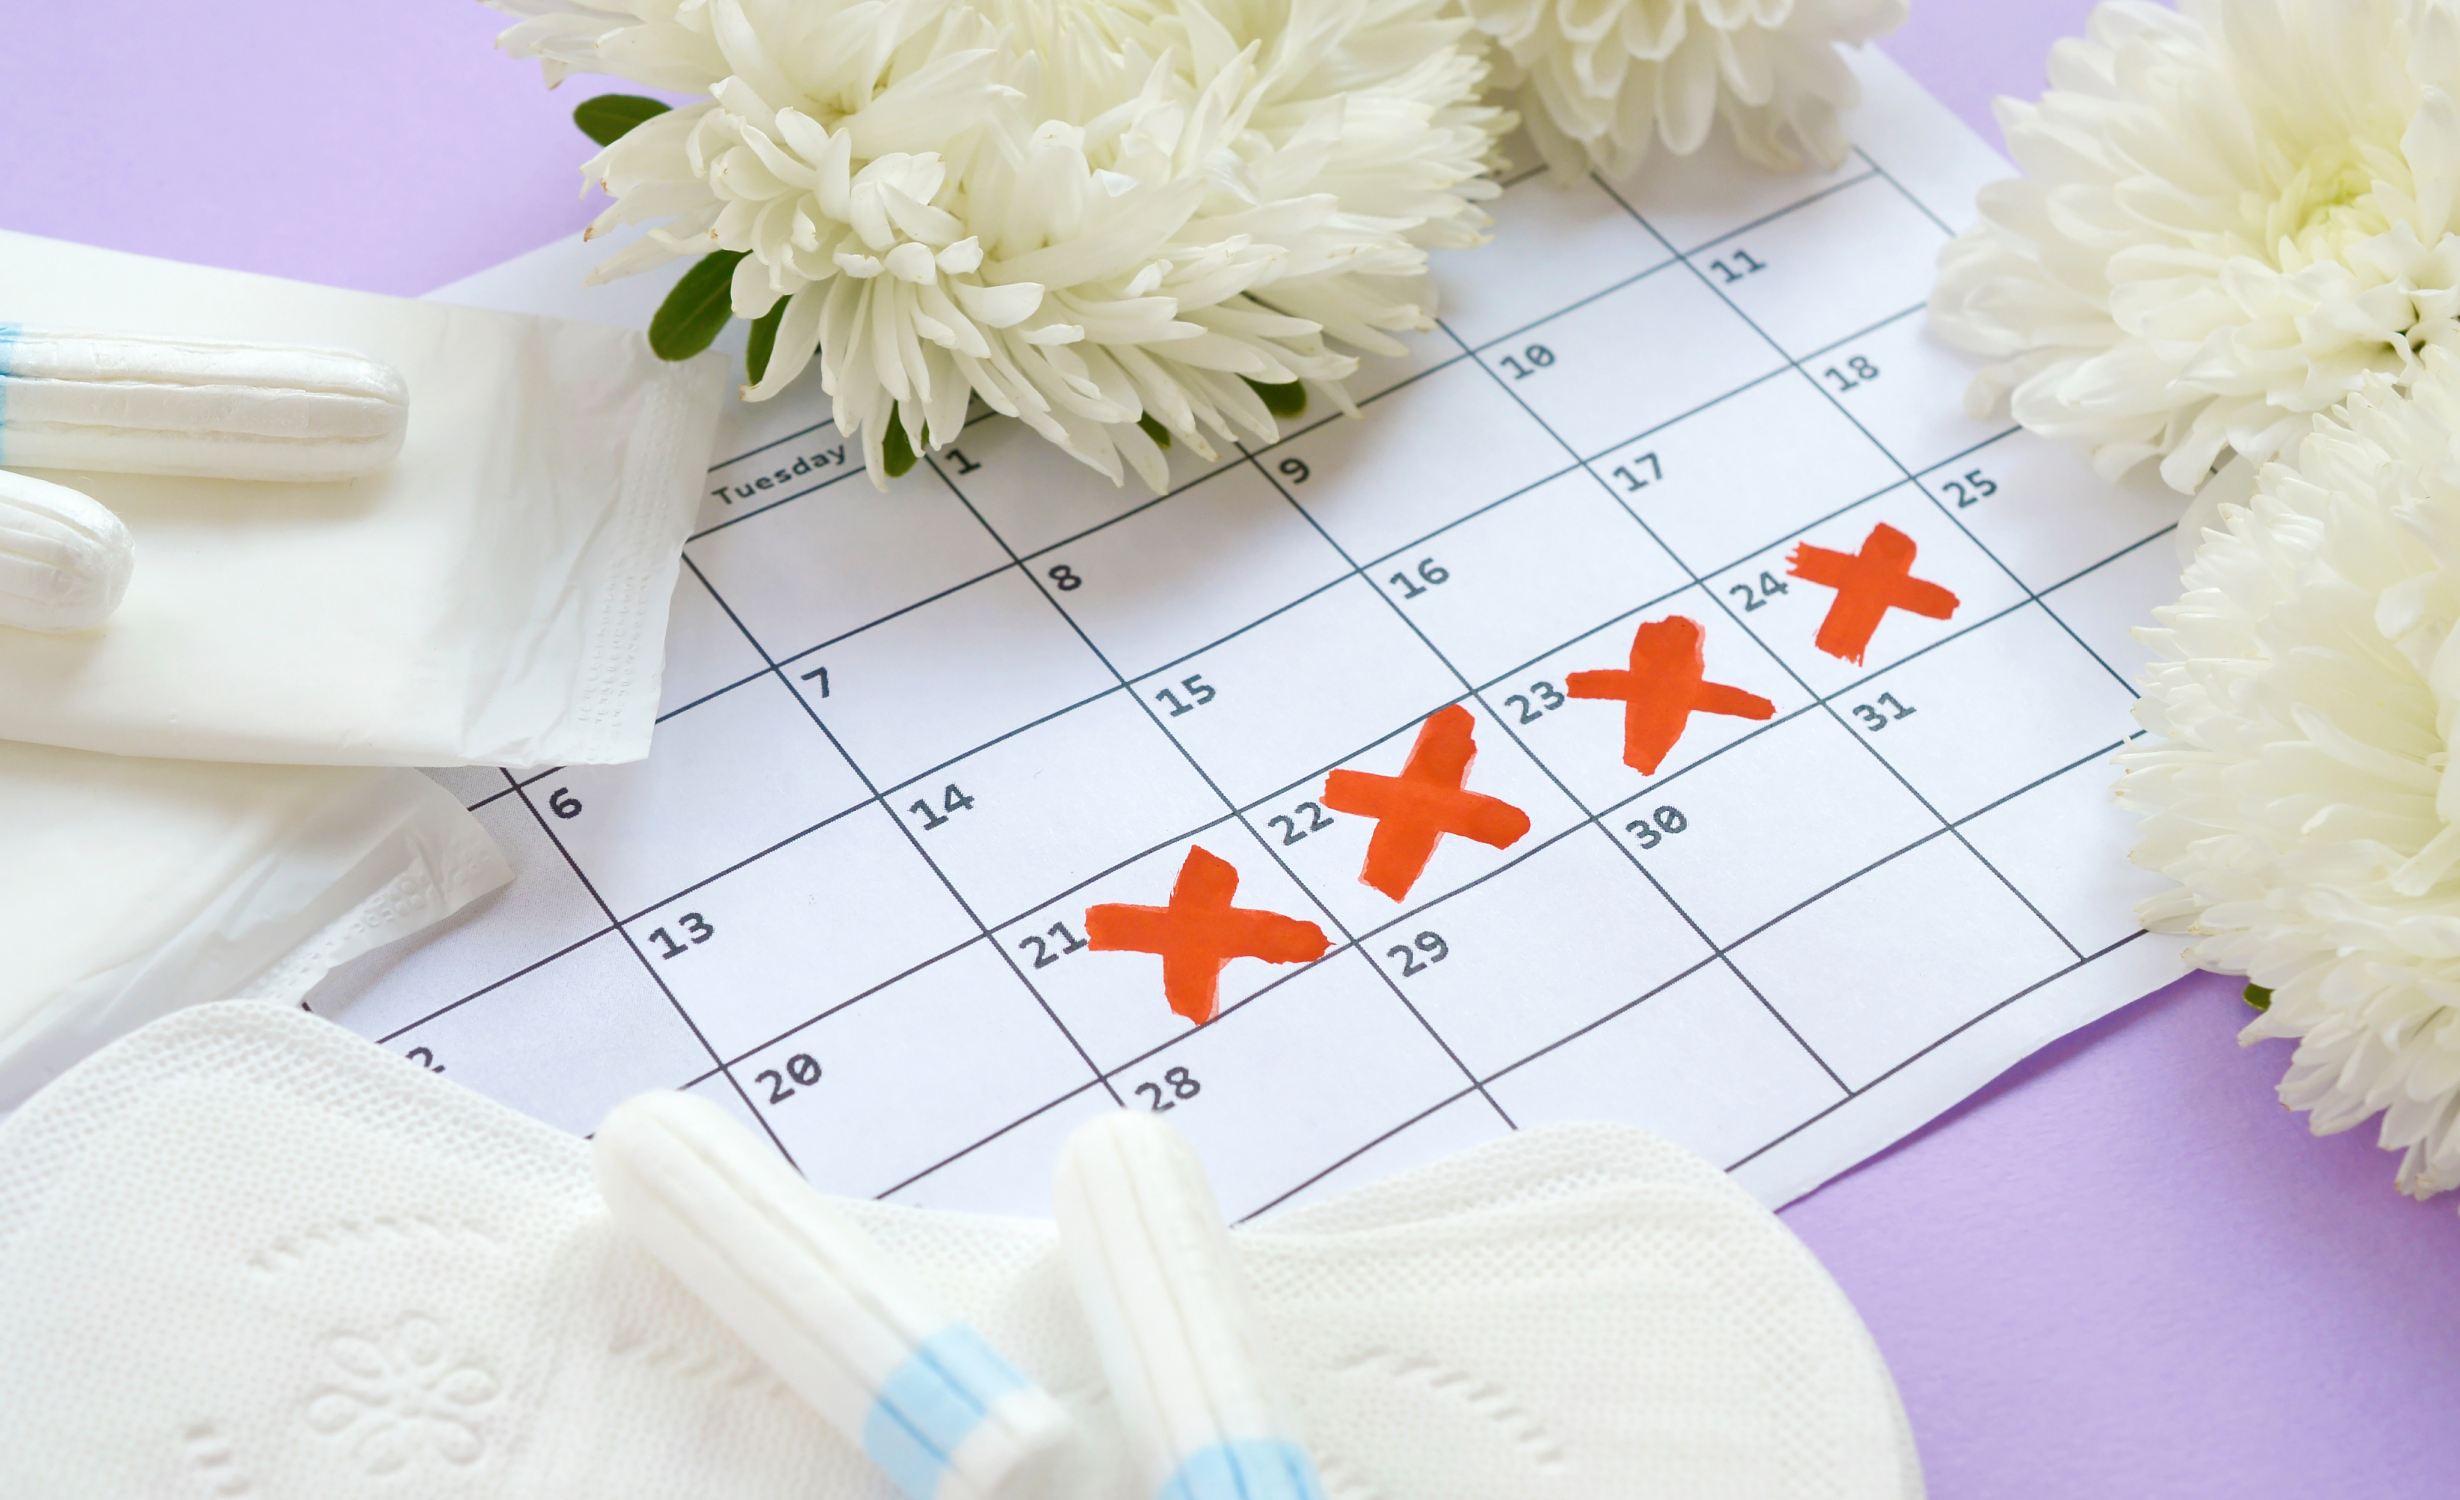 A calendar with red X marks on specific dates, surrounded by menstrual pads, tampons, and white flowers, representing irregular menstrual cycle conditions.